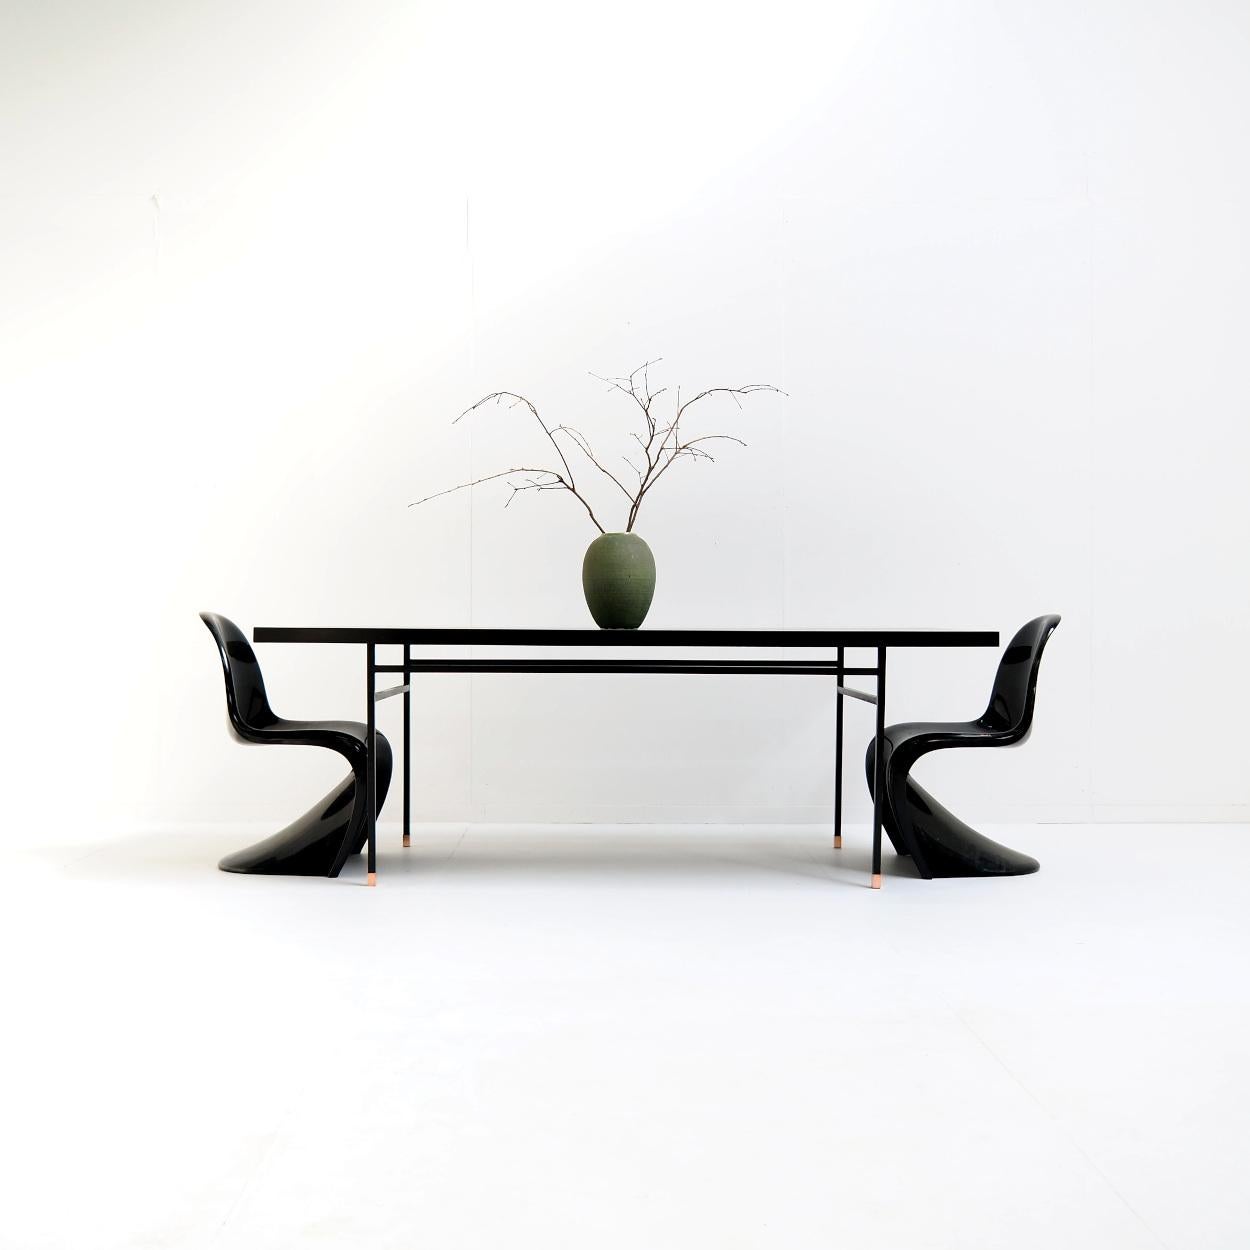 Black dining table attr. to French modernist designer Paul Geoffroy.

The table is a beautiful representative of the French modernism of the 1950s and 60s. A beautiful era with designers like Jacques Adnet, Charlotte Perriand, Pierre Guariche and